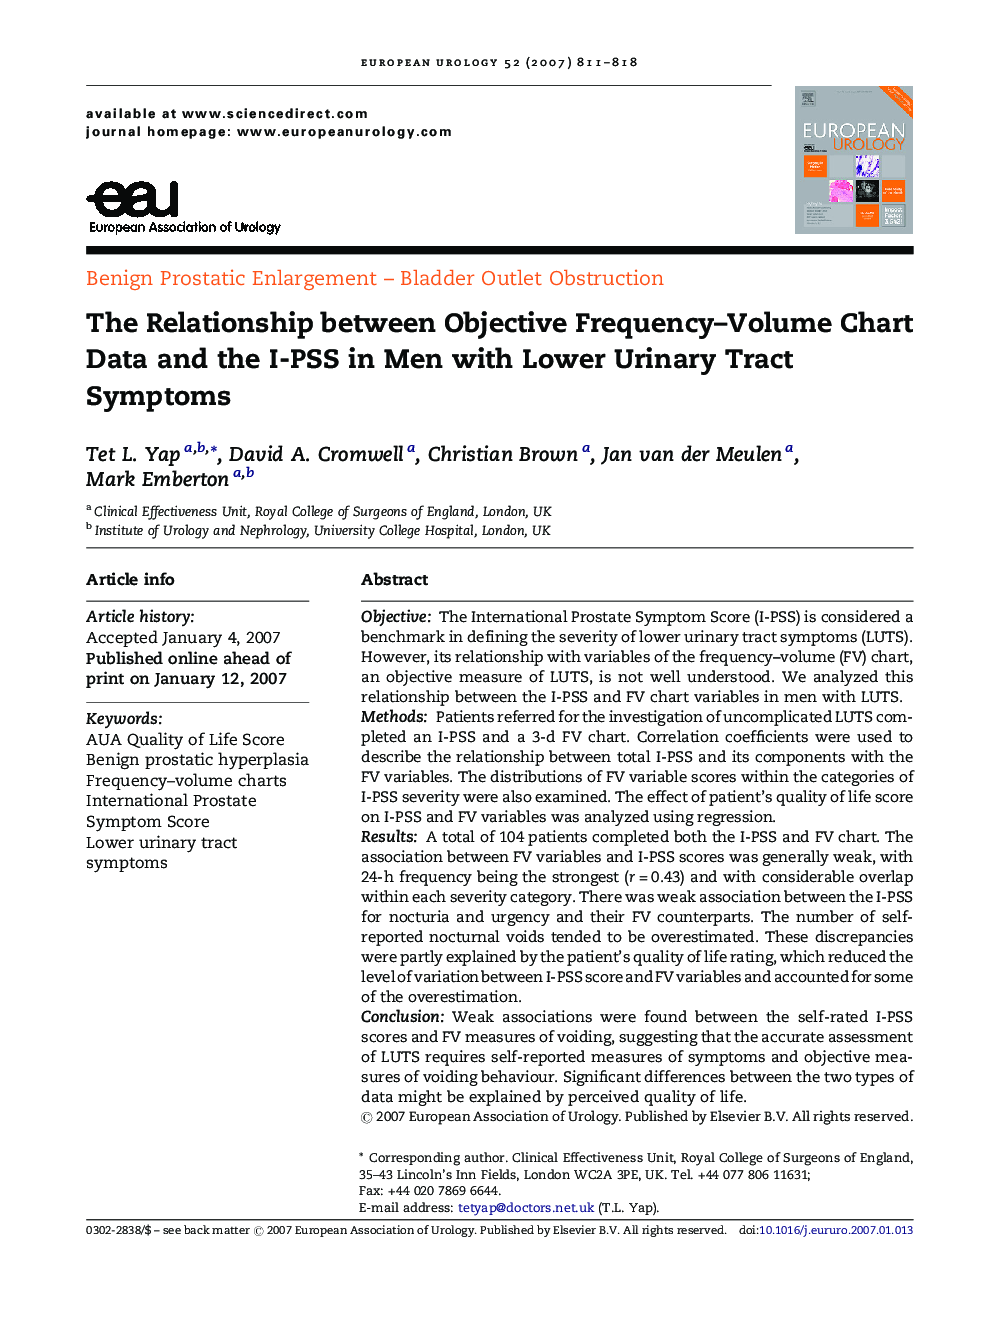 The Relationship between Objective Frequency–Volume Chart Data and the I-PSS in Men with Lower Urinary Tract Symptoms